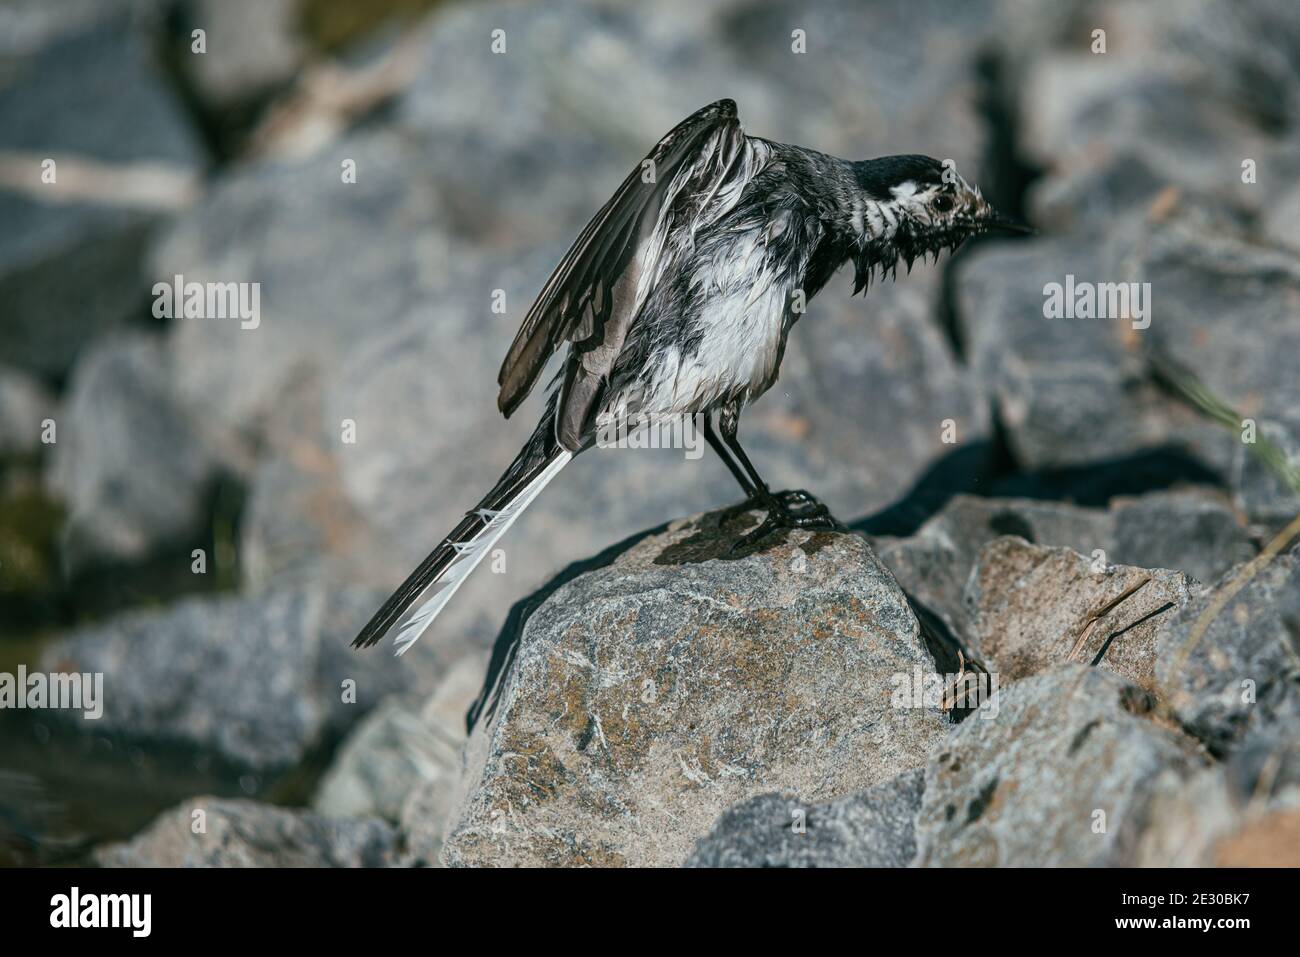 White Wagtail, Motacilla alba bird bathes in a pond and basks on stones under the rays of the summer sun Stock Photo